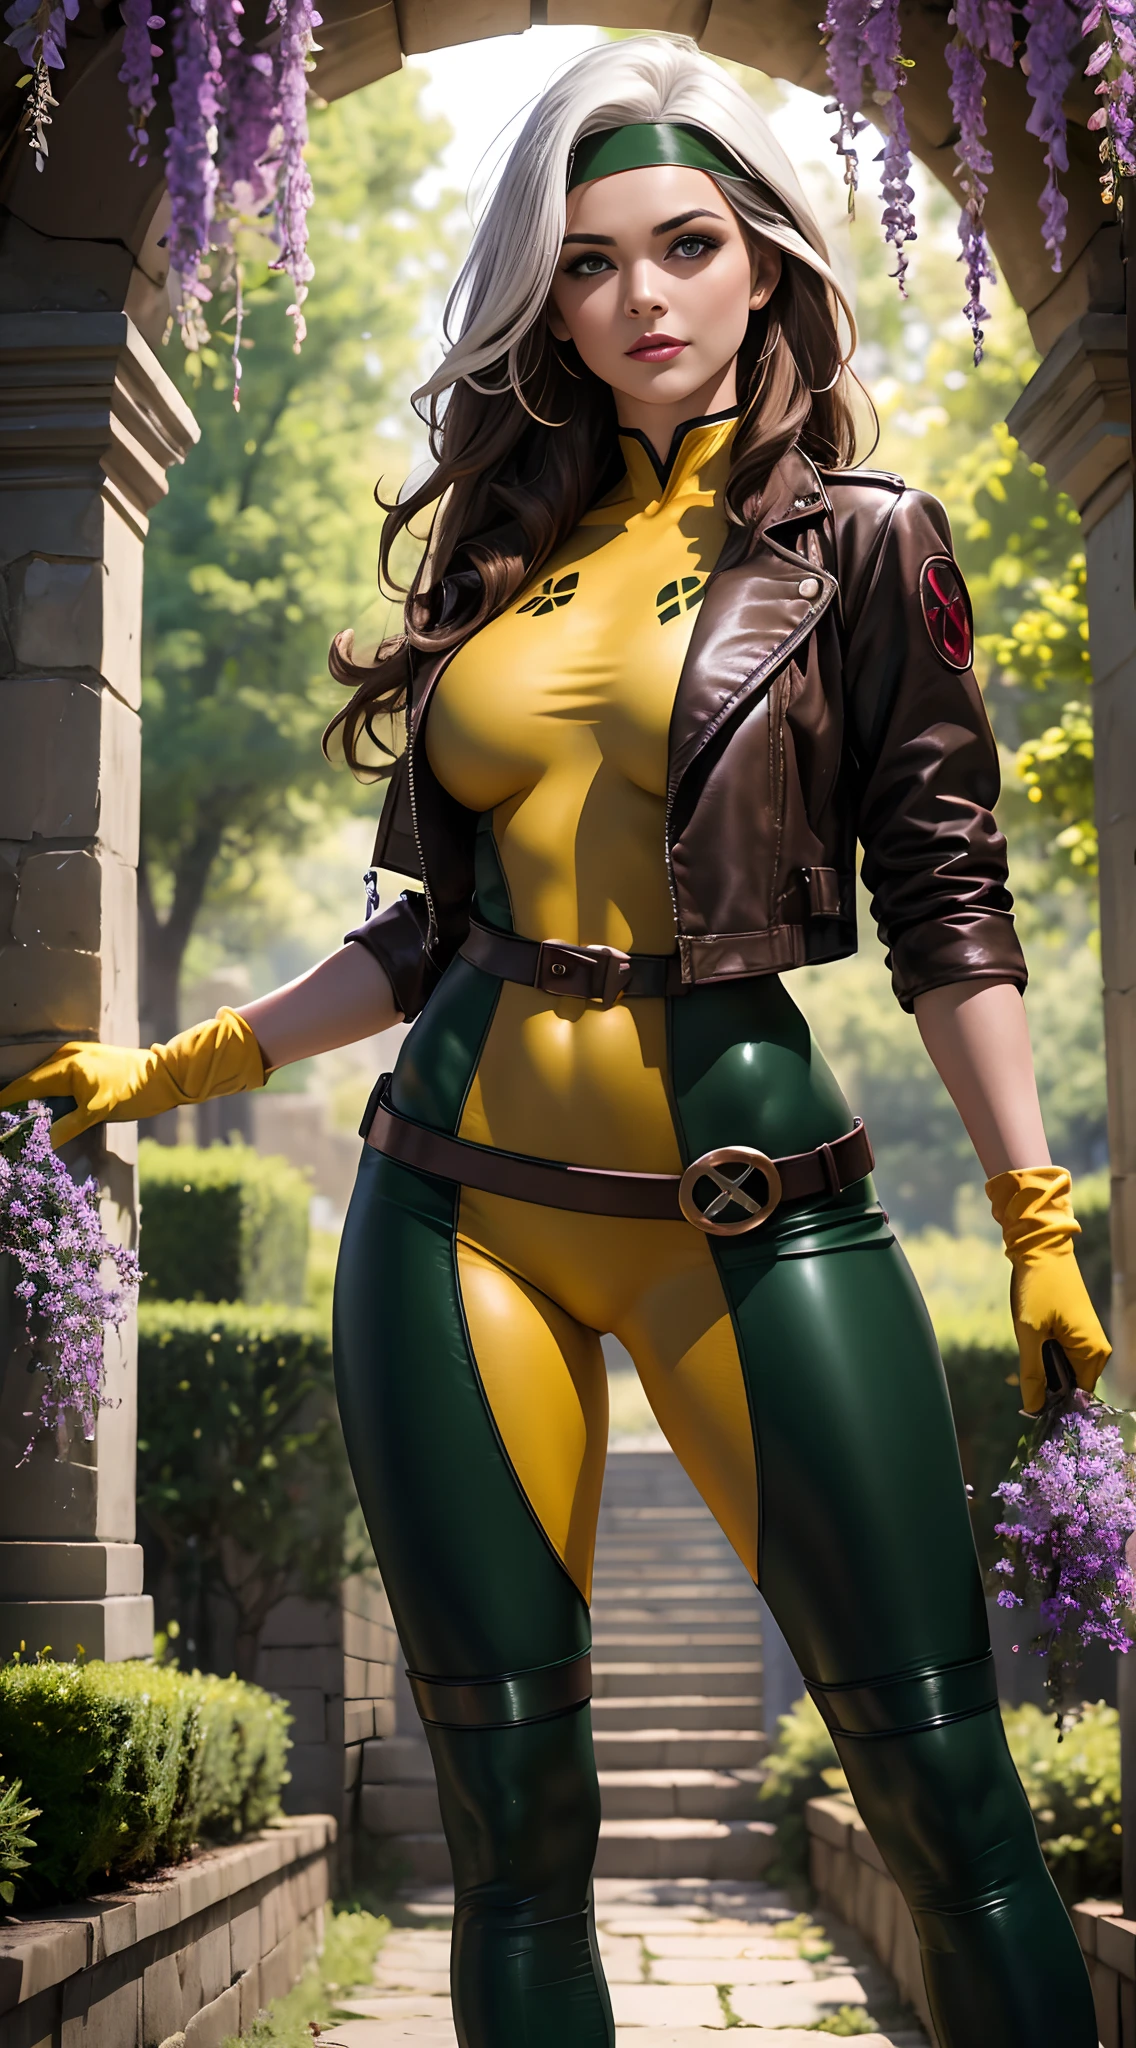 (masterpiece:1.0), (best_quality:1.2), Classic Rogue, 1991 Rogue X-Men, 1girl, Only, full body view, facing the viewer, hand on hips, legs parted, confident stance, proud stance, medium length hair, brown hair, wavy hair, one lock of white hair, green headband, green eyes, mischievous look, parted lips, curvy figure, large breasts, lipstick, makeup, brown leather jacket, gloves, loose belt, skin-tight leggings, open jacket, knee-high boots, Looking down at the Viewer, sunlight, sunrays, light source from the side, (realism: 1.5), (Realistic: 1.4), (Absurdity:1.4), 8k, ultra-detailed, Detailed Beautiful Woman, (only:1.4), 1girl, background of garden, stone walls, stone archway and pathways, wisteria trees, outside of mansion, official art, extremely detailed CG unity 8k wallpaper, perfect lighting, Colorful, ultra high res, photography, 8K, HDR, Kodak portra 400, film grain, blurry background, (bokeh:1.2), lens flare, (vibrant_color:1.2), professional photograph